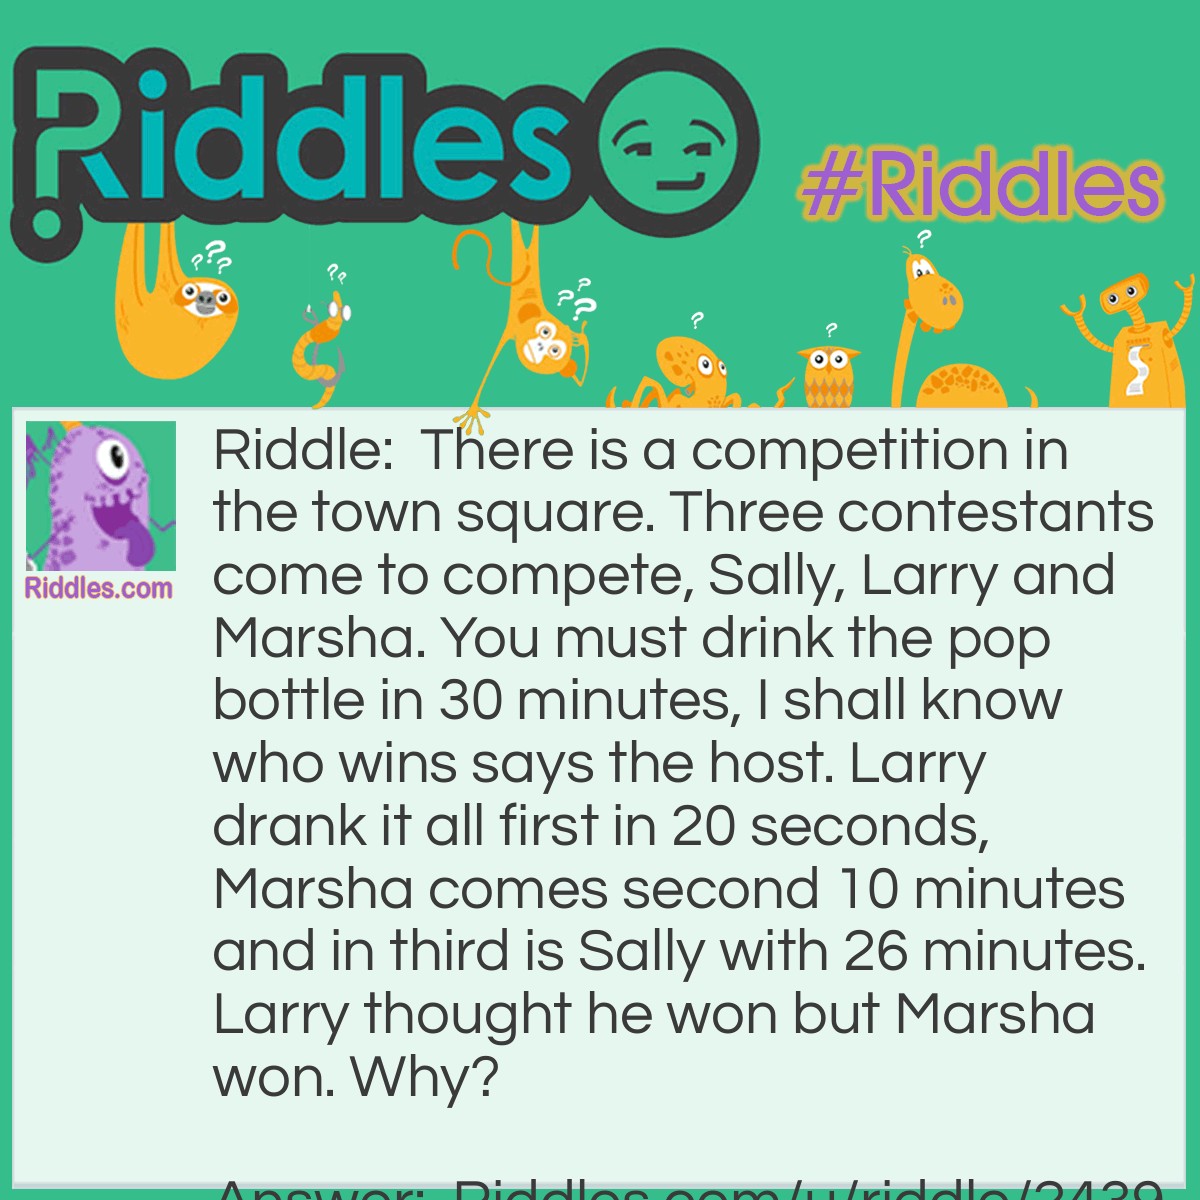 Riddle: There is a competition in the town square. Three contestants come to compete, Sally, Larry and Marsha. You must drink the pop bottle in 30 minutes, I shall know who wins says the host. Larry drank it all first in 20 seconds, Marsha comes second 10 minutes and in third is Sally with 26 minutes. Larry thought he won but Marsha won. Why? Answer: The host only said within 30 minutes he never said first and he knew Marsha should win.